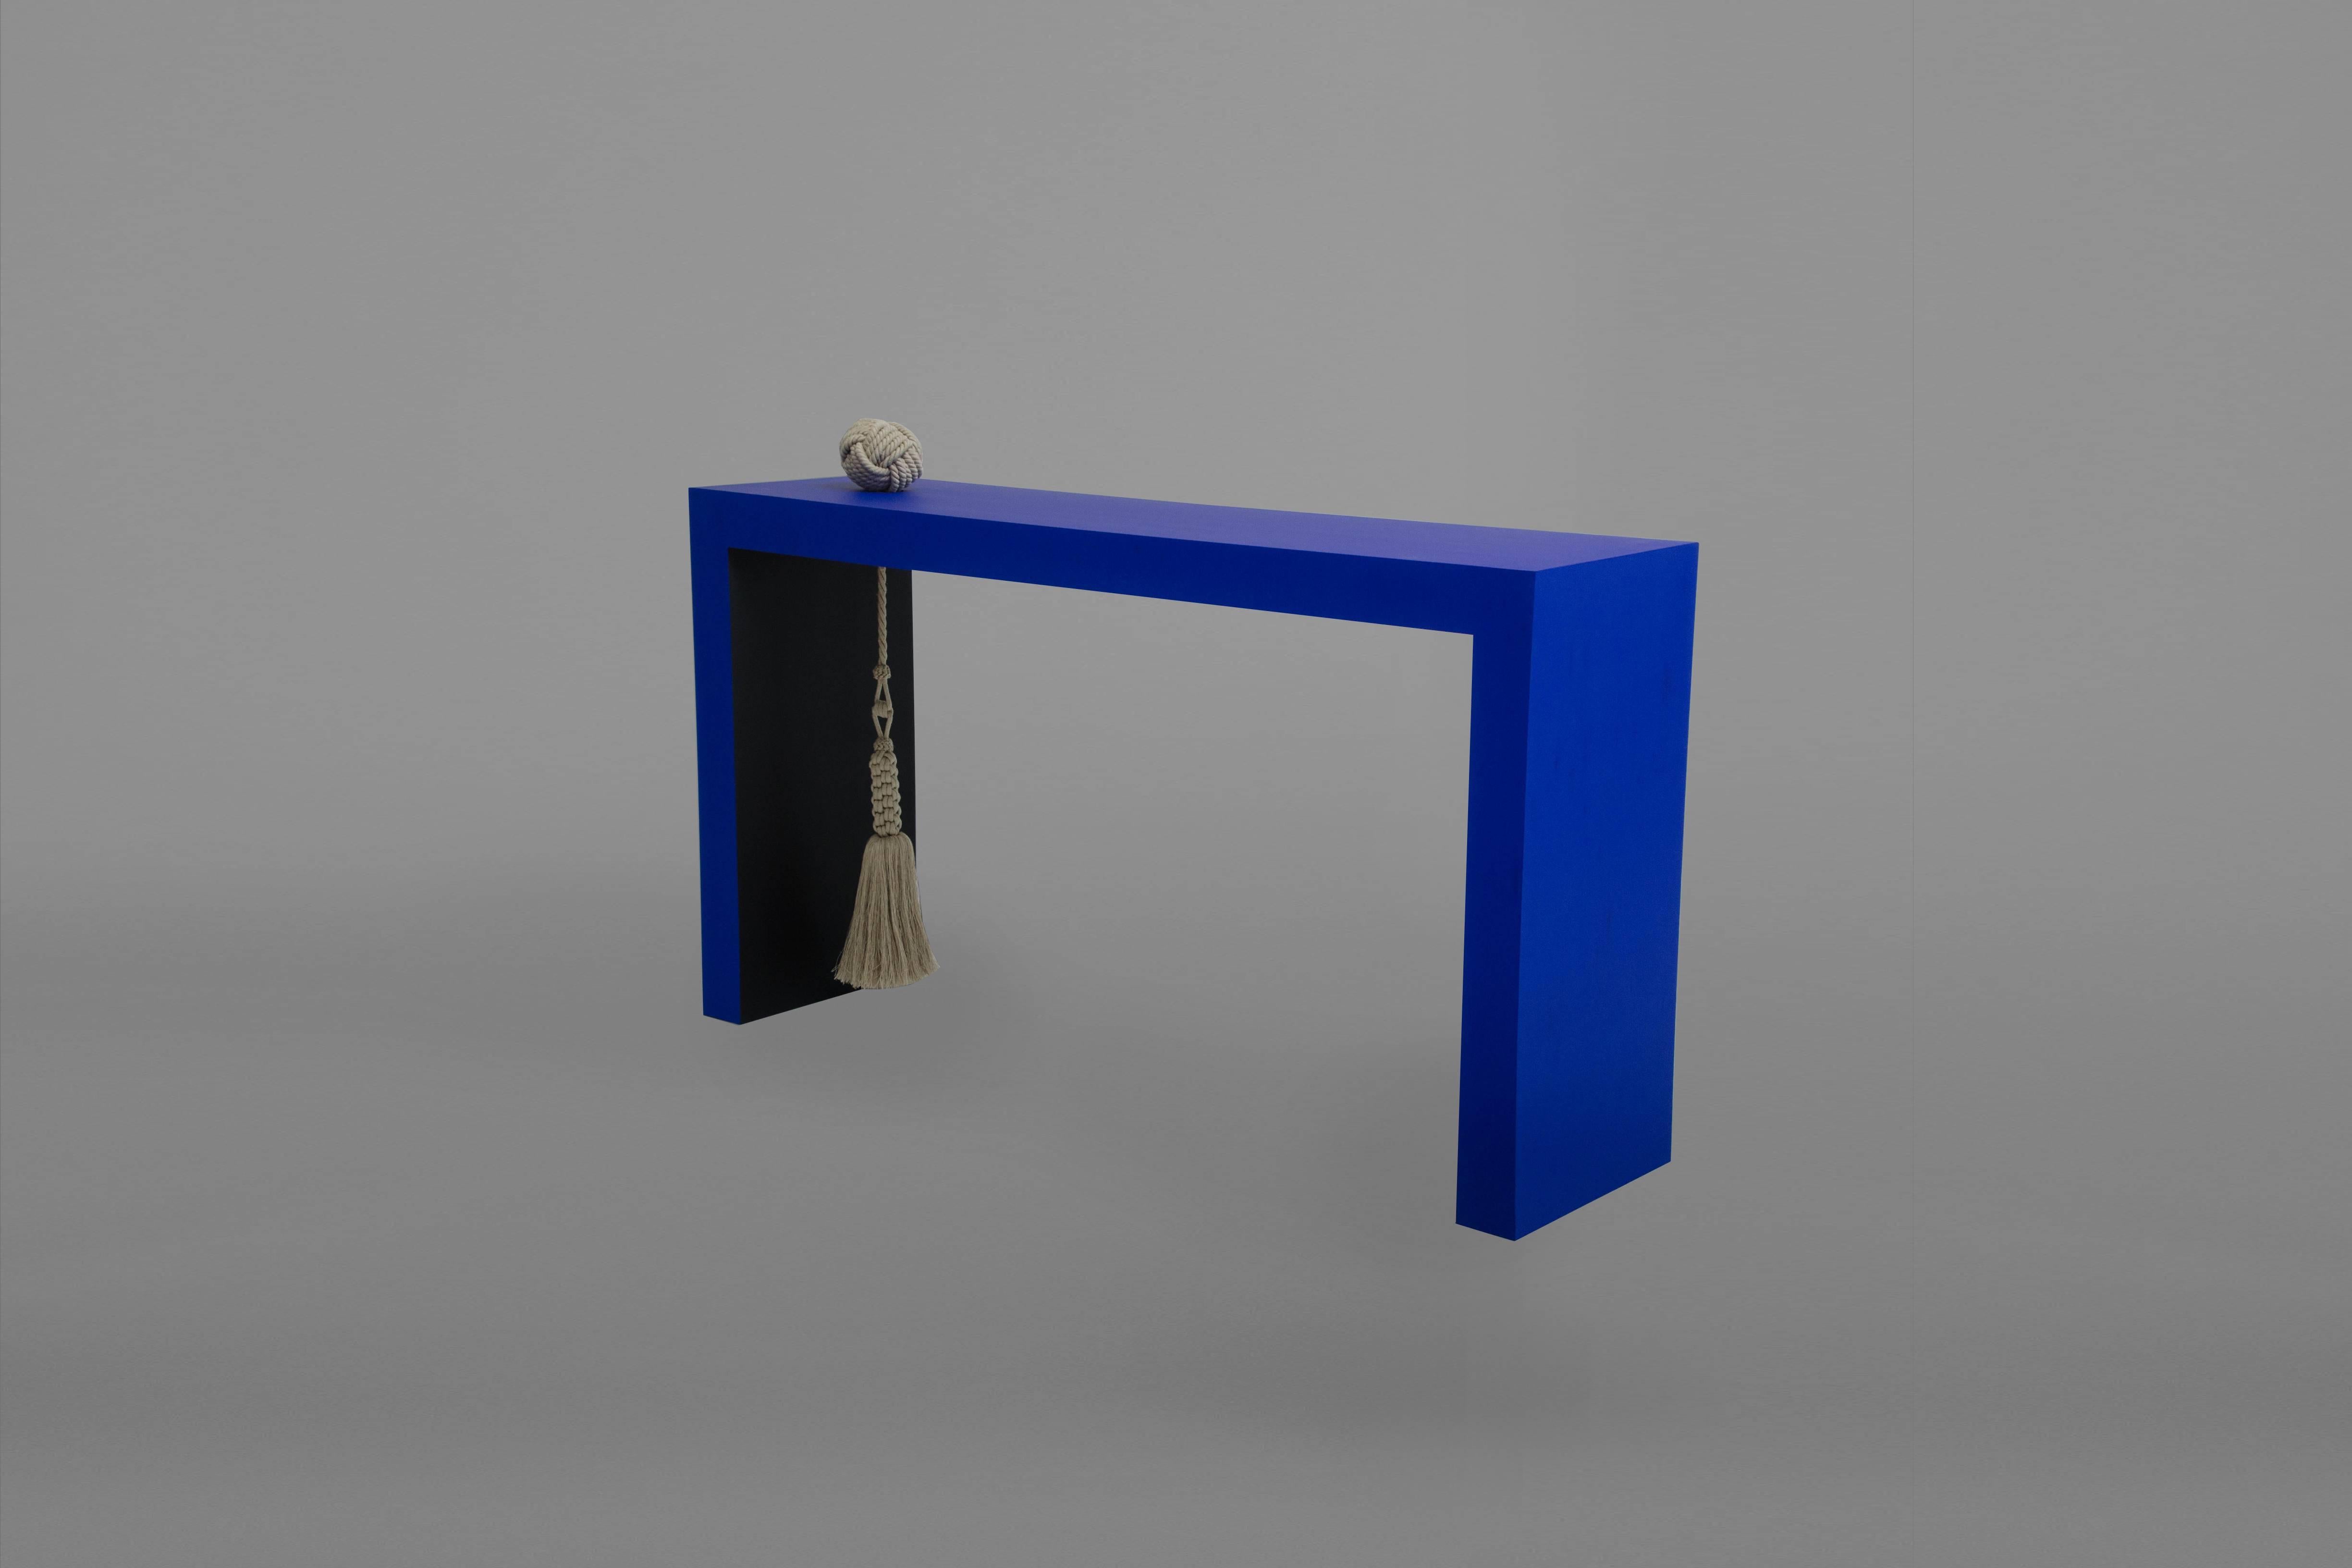 Wood console painted with matte finish (Yves Klein blue and black) with custom linen tassel and knot, by Kelly Behun Studio. 
Measures: 54” W x 14” D x 30” H.
Made to order.
Lead time 12-14 weeks.
Custom sizes and paint finishes available upon